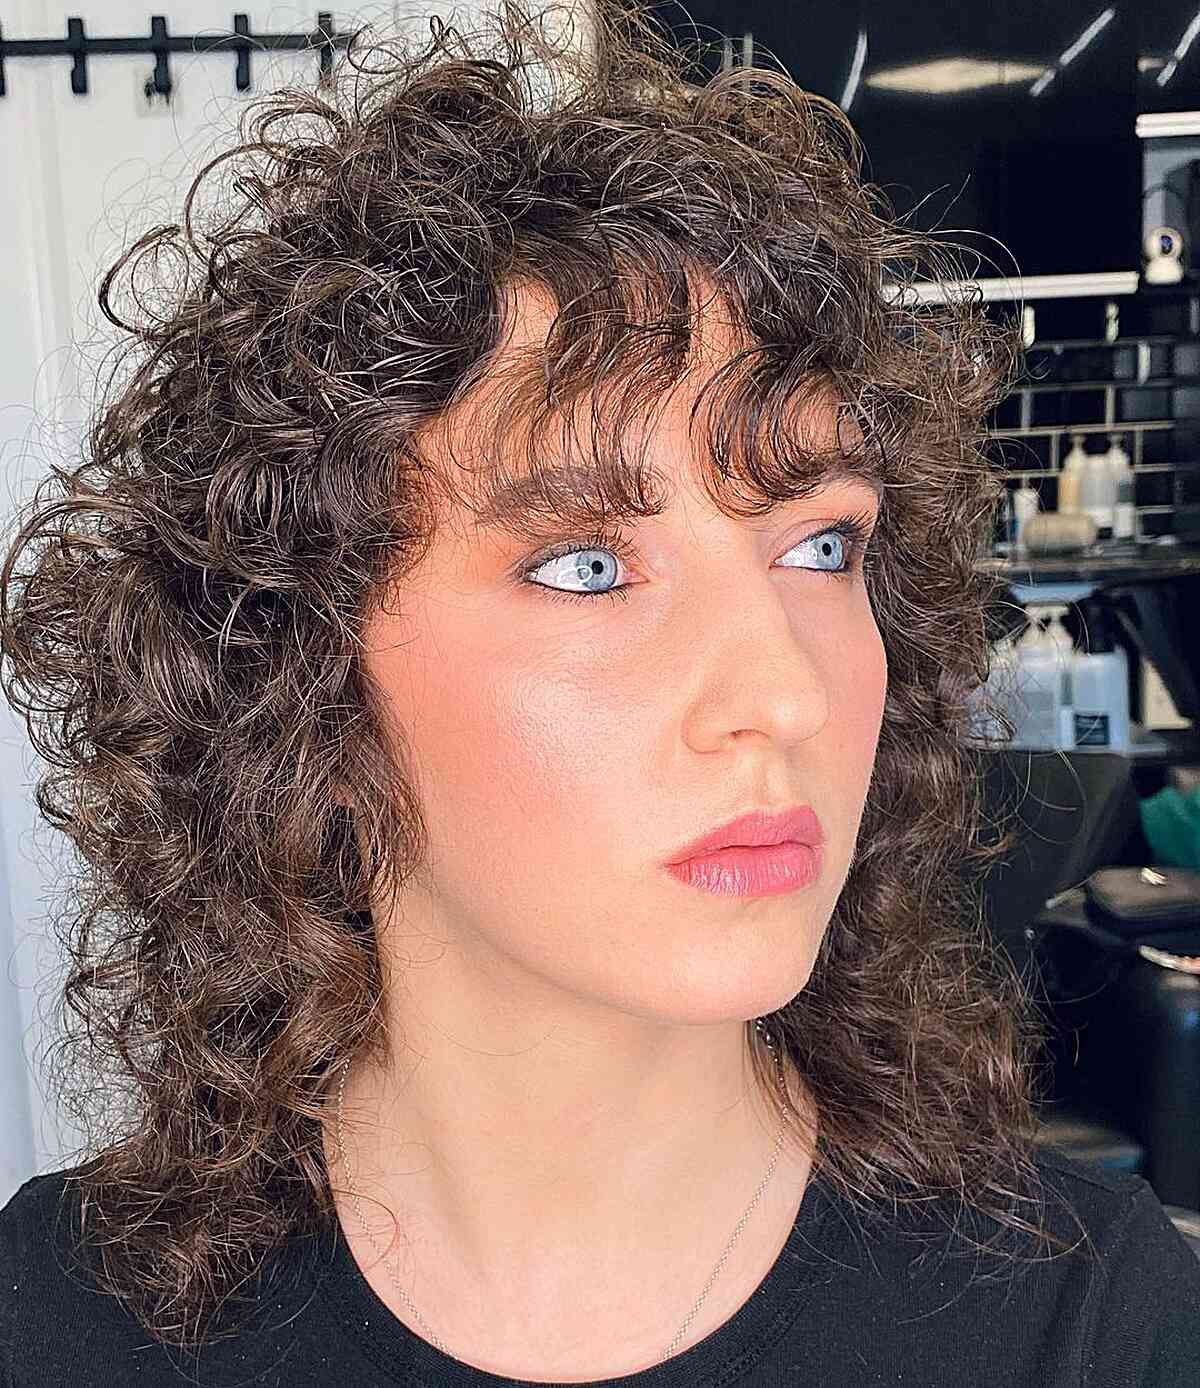 Shoulder-Length '80s Curly Mullet with Wispy Bangs